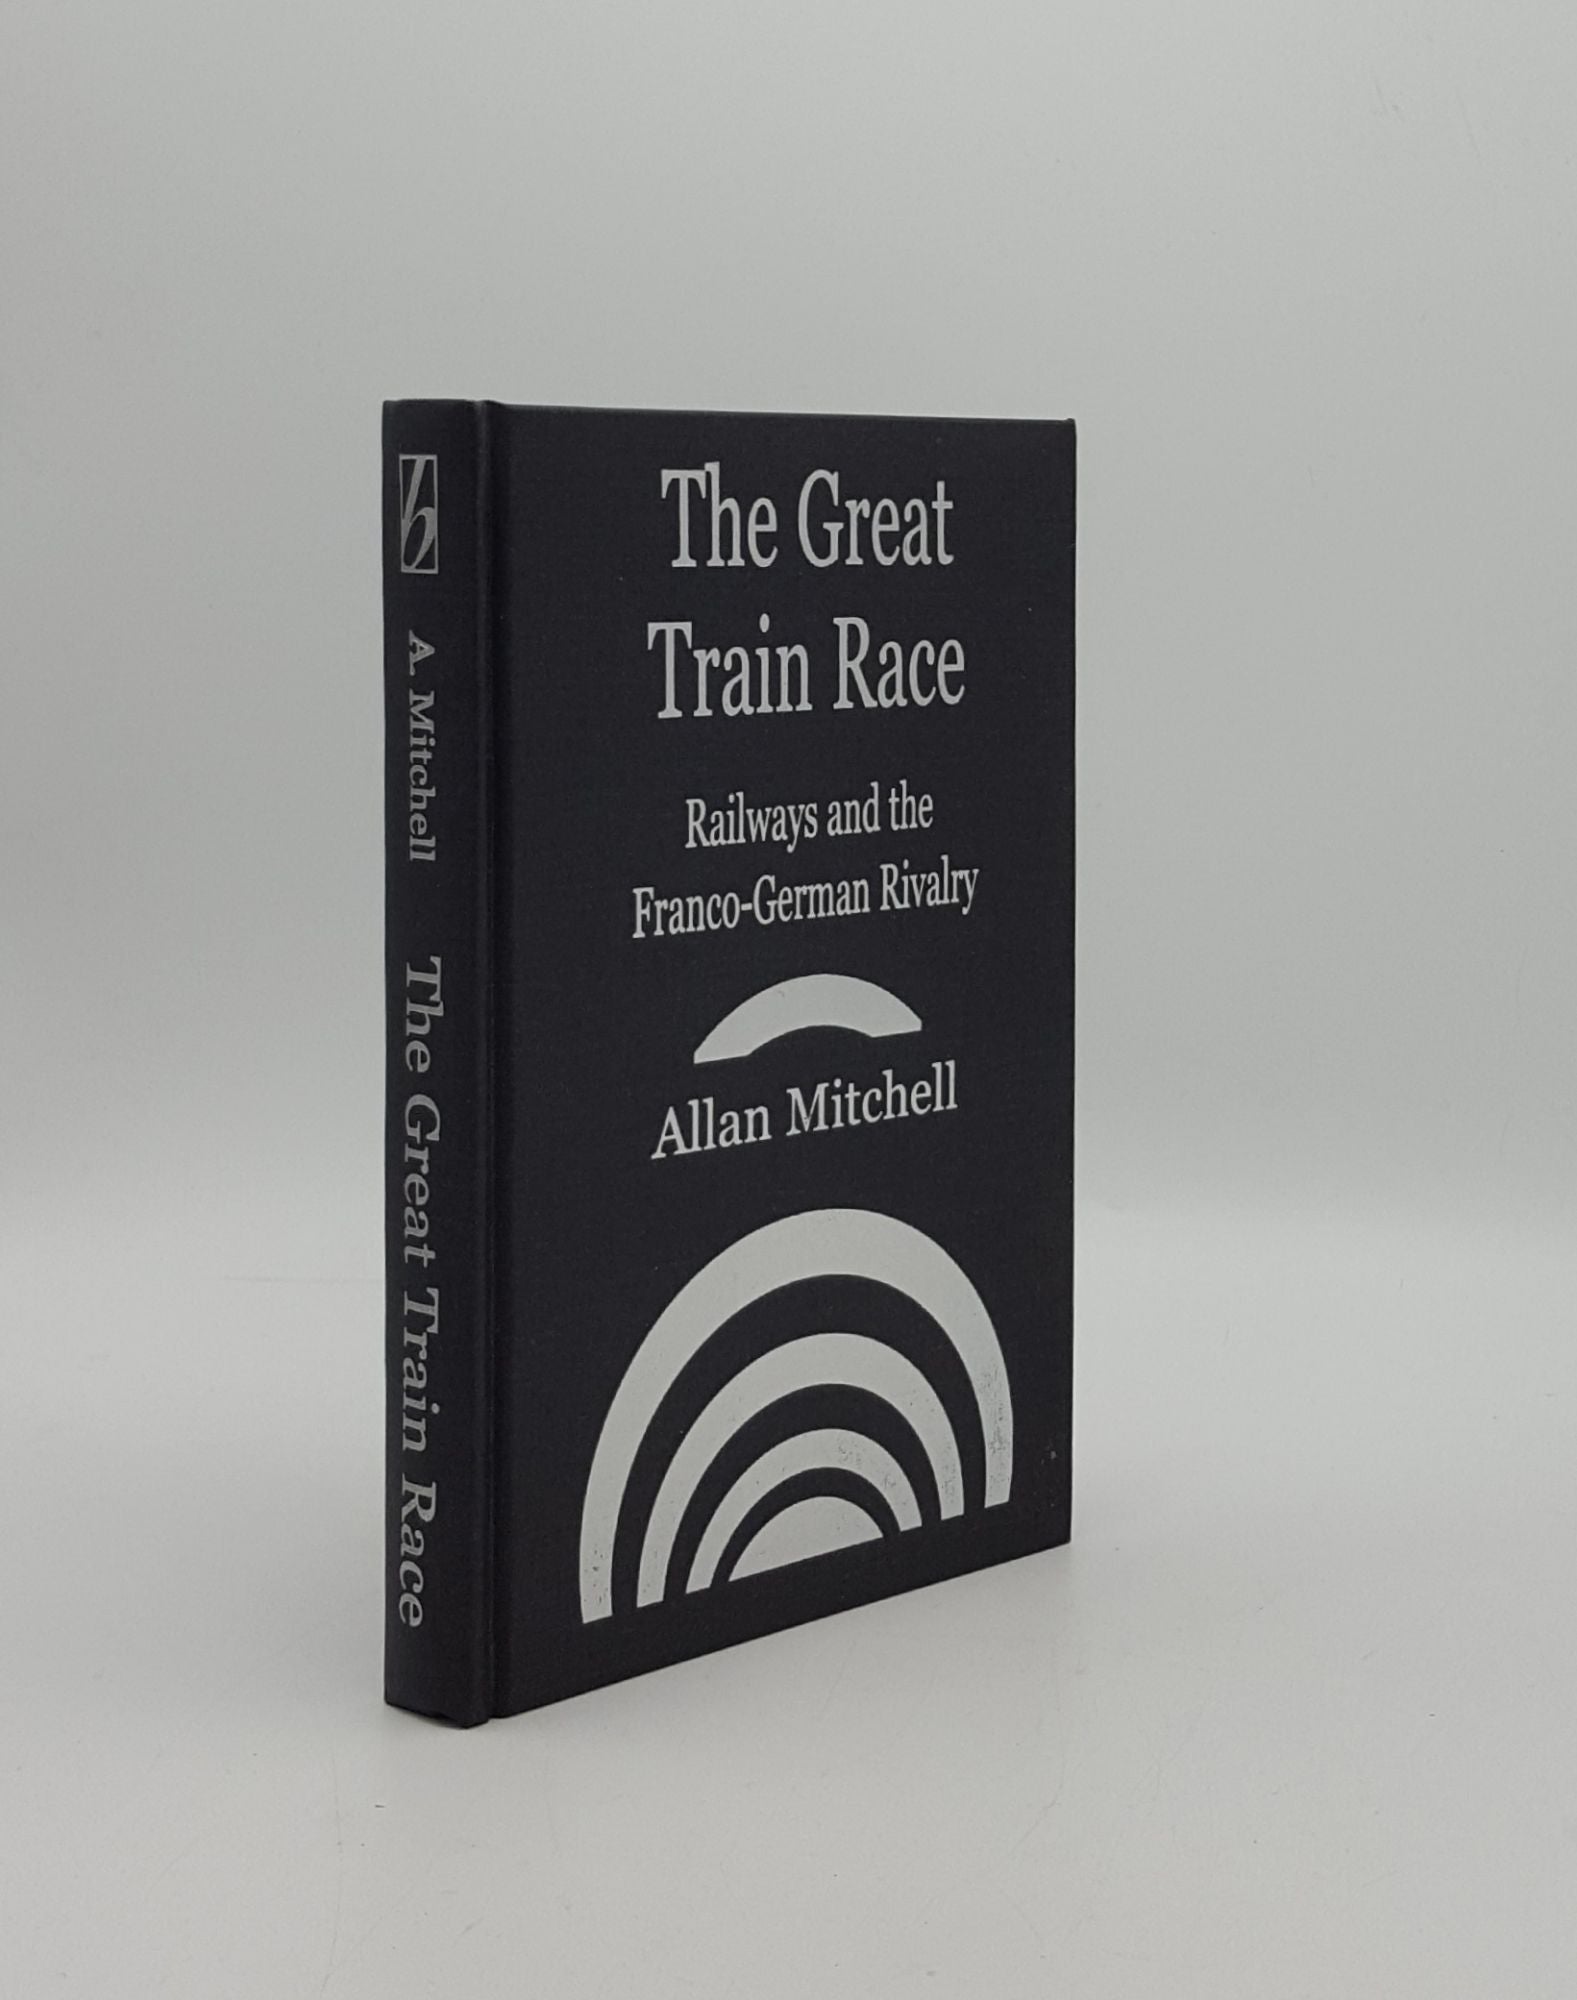 MITCHELL Allan - The Great Train Race Railways and the Franco-German Rivalry 1815-1914